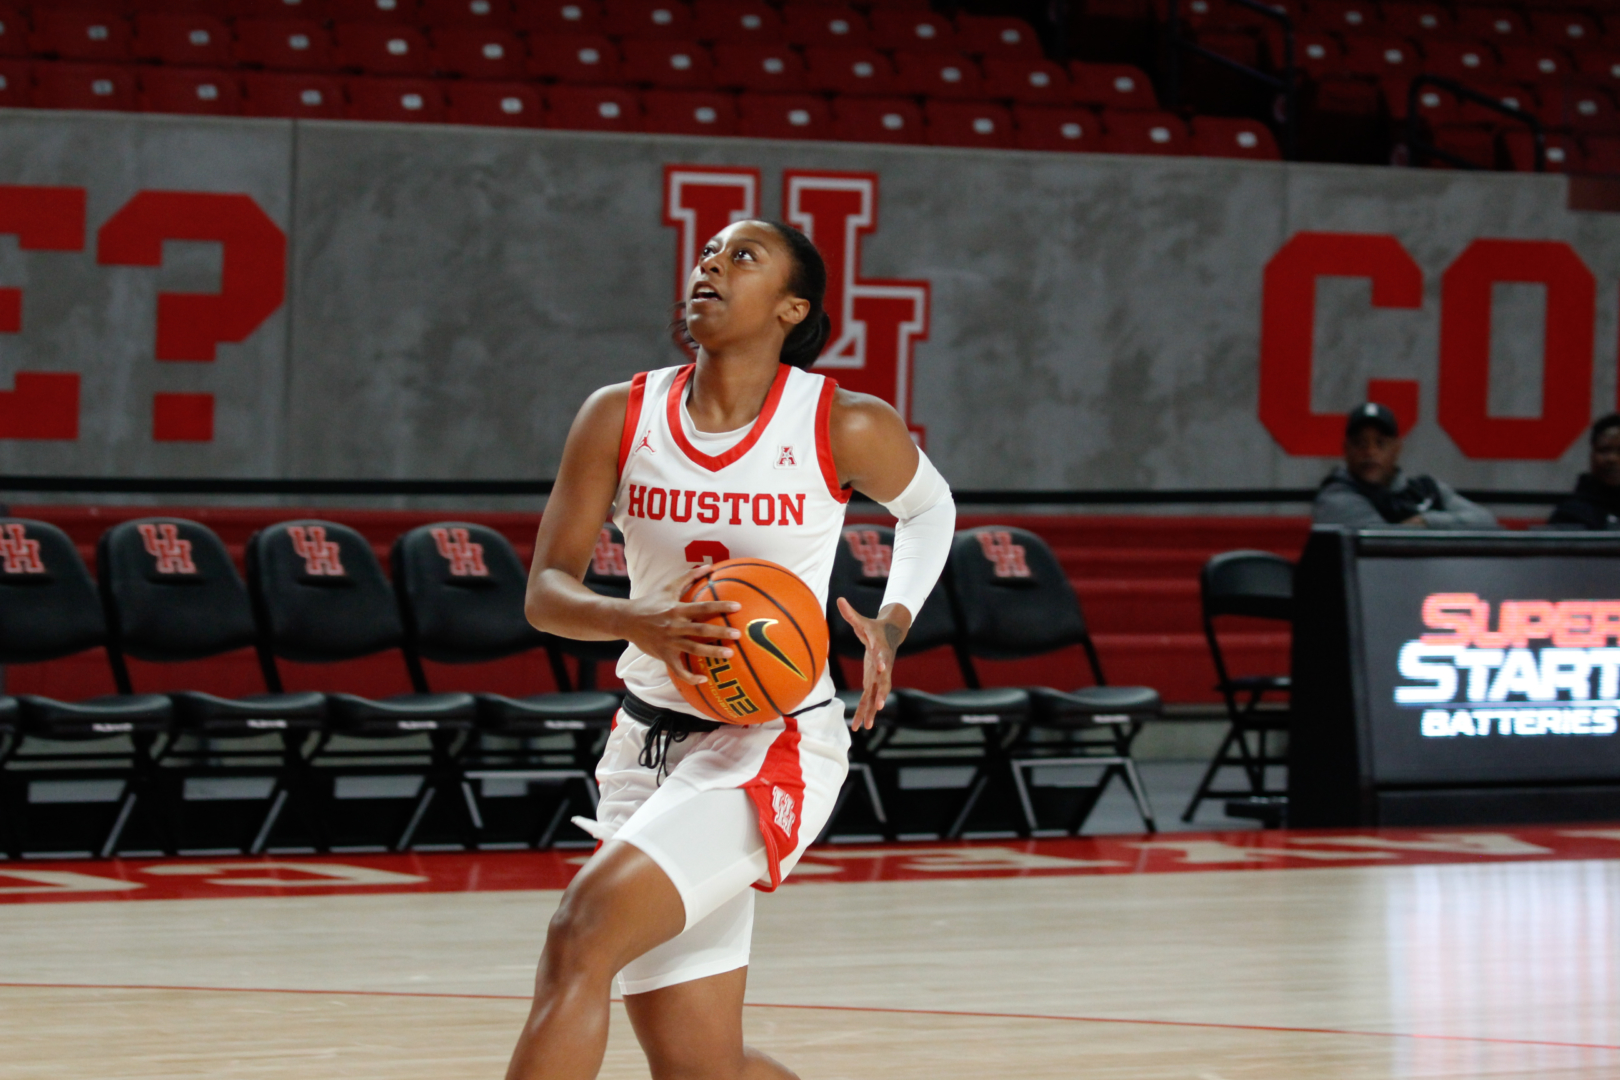 Junior guard Tiara Young scored a team-high nine points in the UH women's basketball team's loss to UCF on Wednesday night. | Esther Umoh/The Cougar